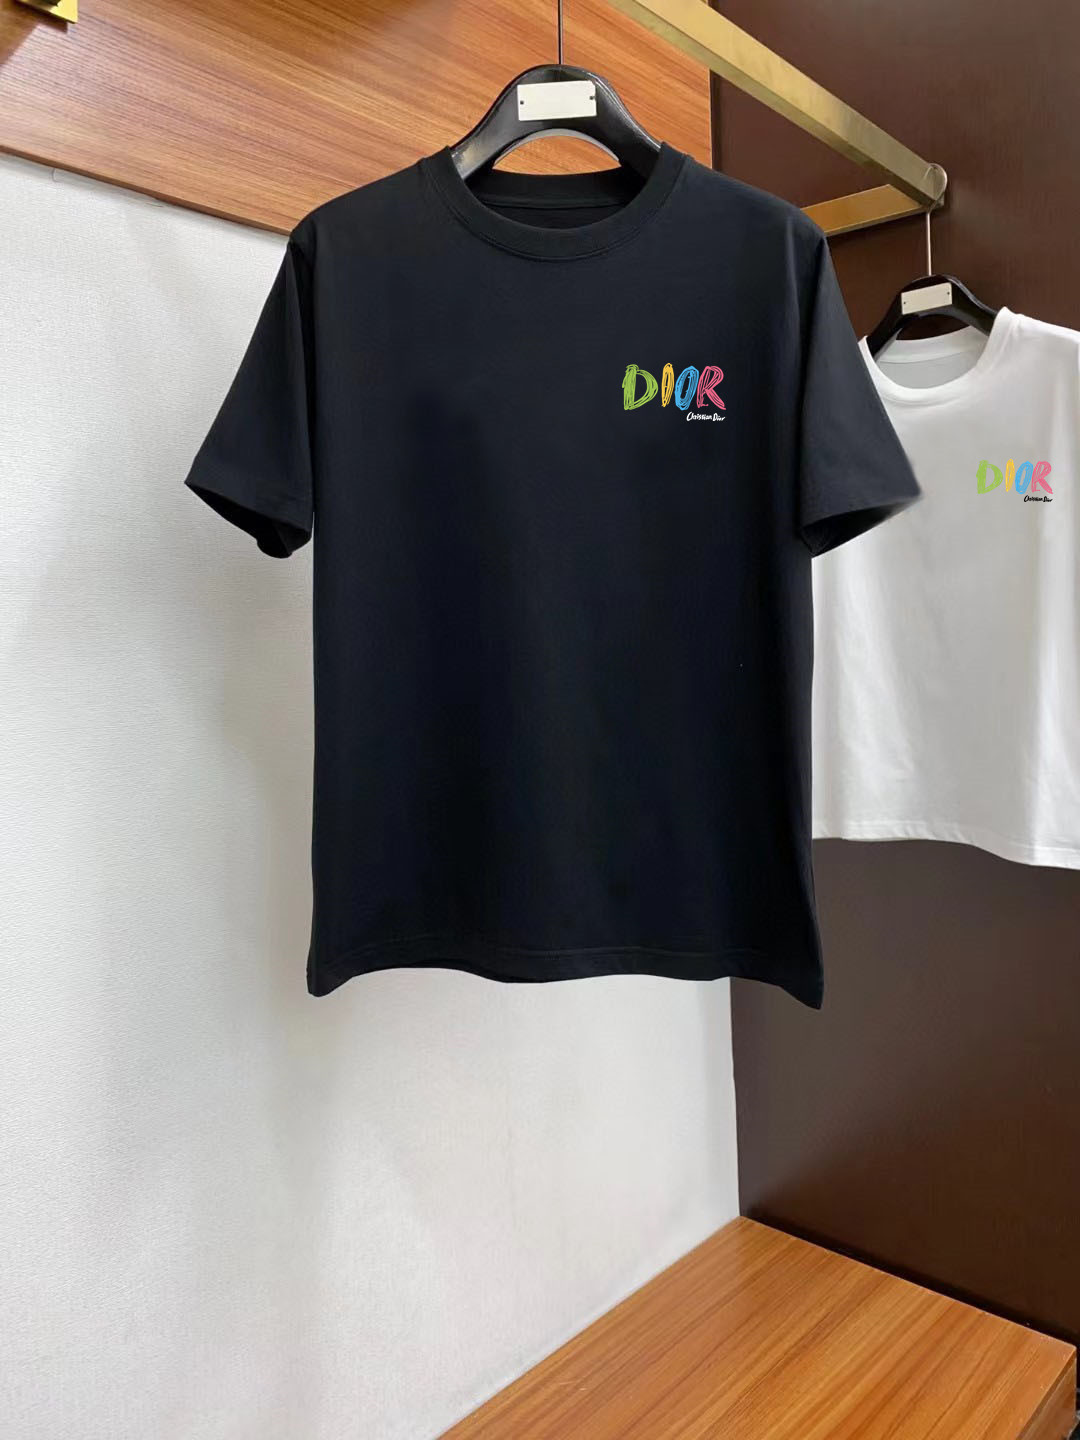 Dior Clothing T-Shirt Black White Cotton Spring/Summer Collection Short Sleeve